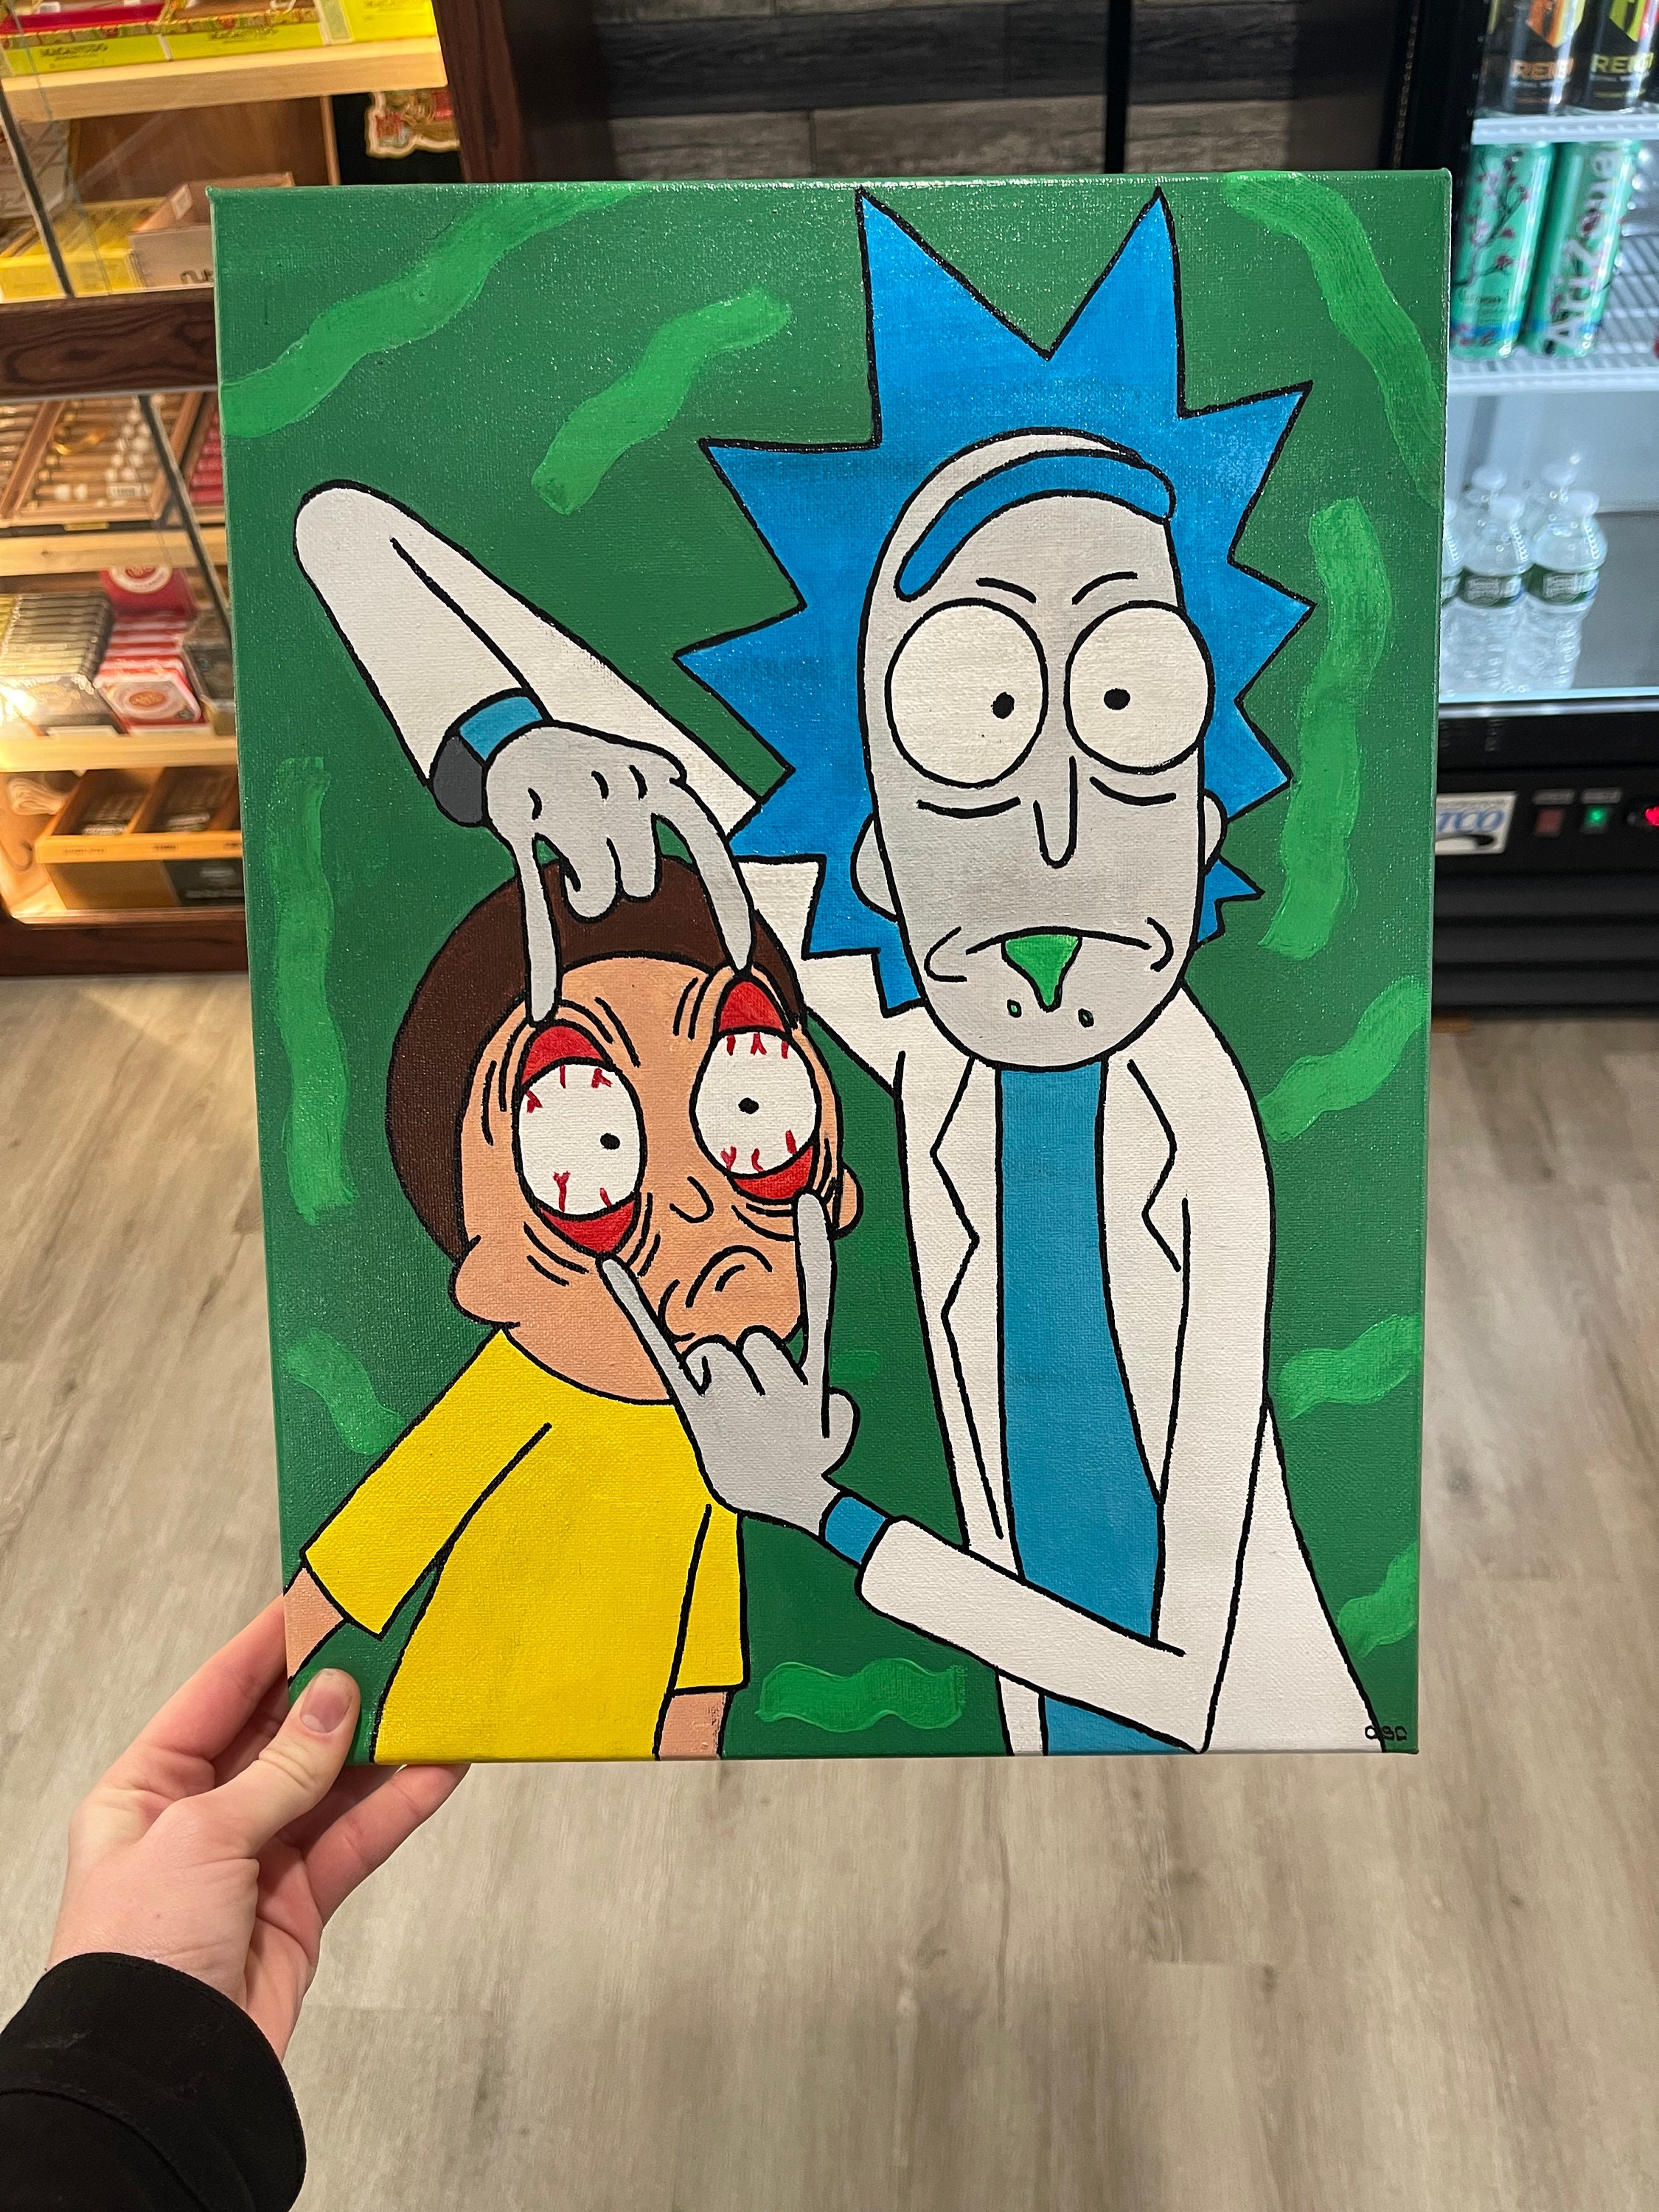 Rick and Morty painting www.ugel01ep.gob.pe